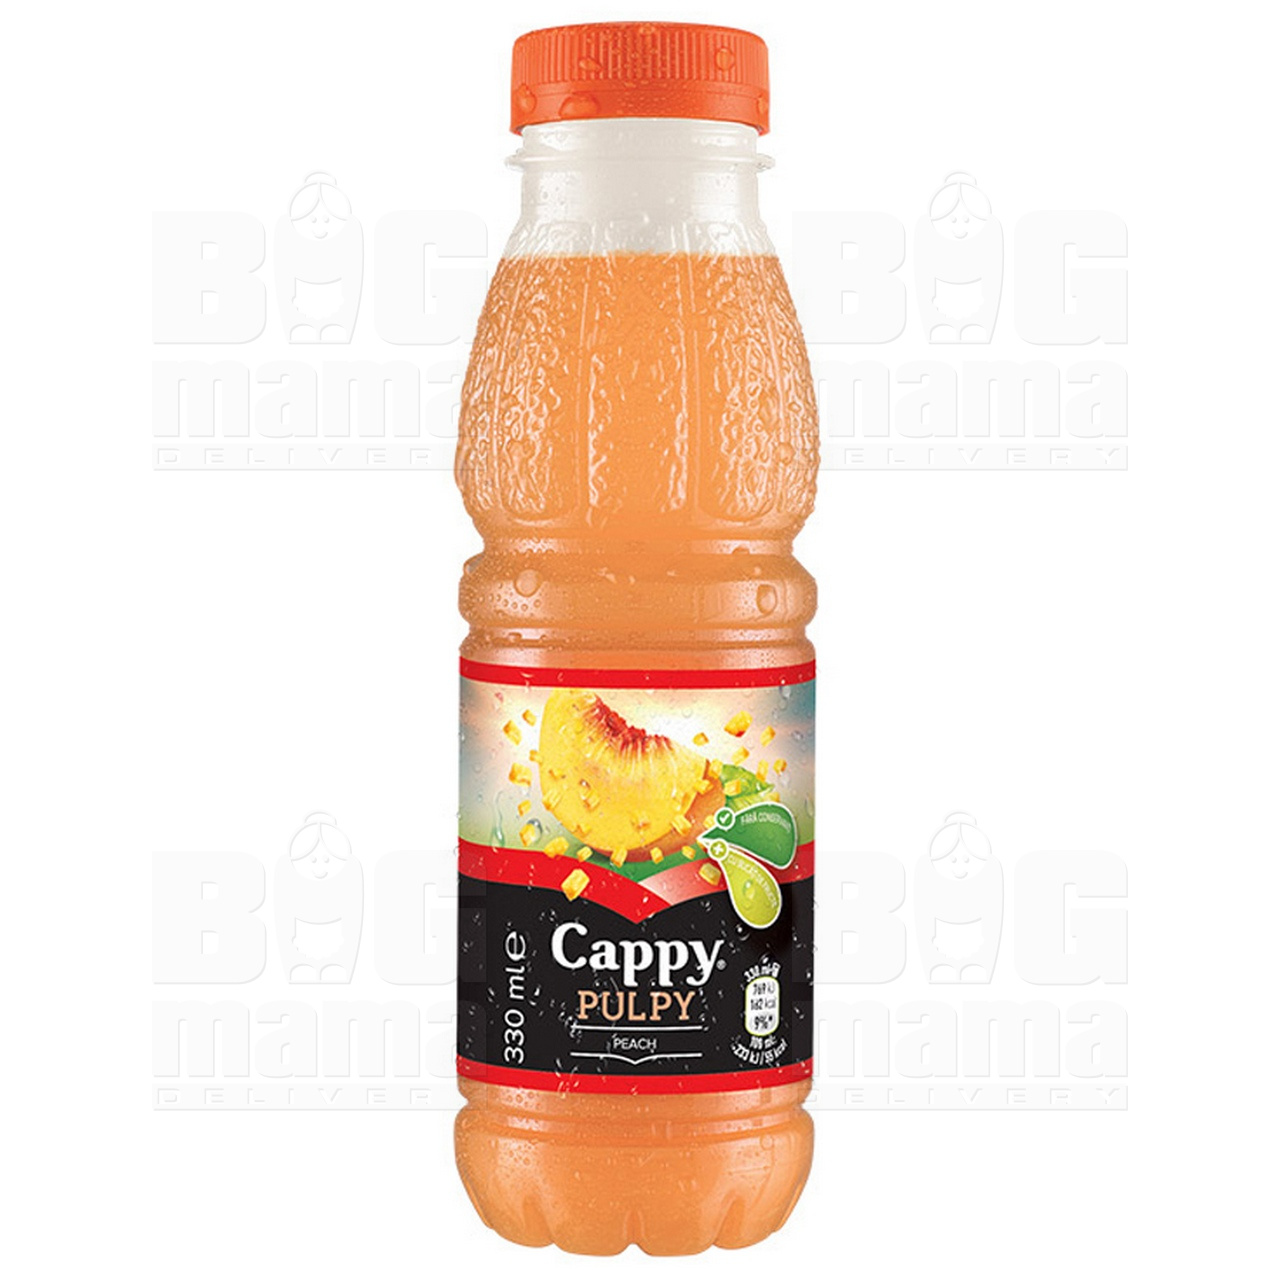 Product #232 image - Cappy Pulpy Piersica 0,33l